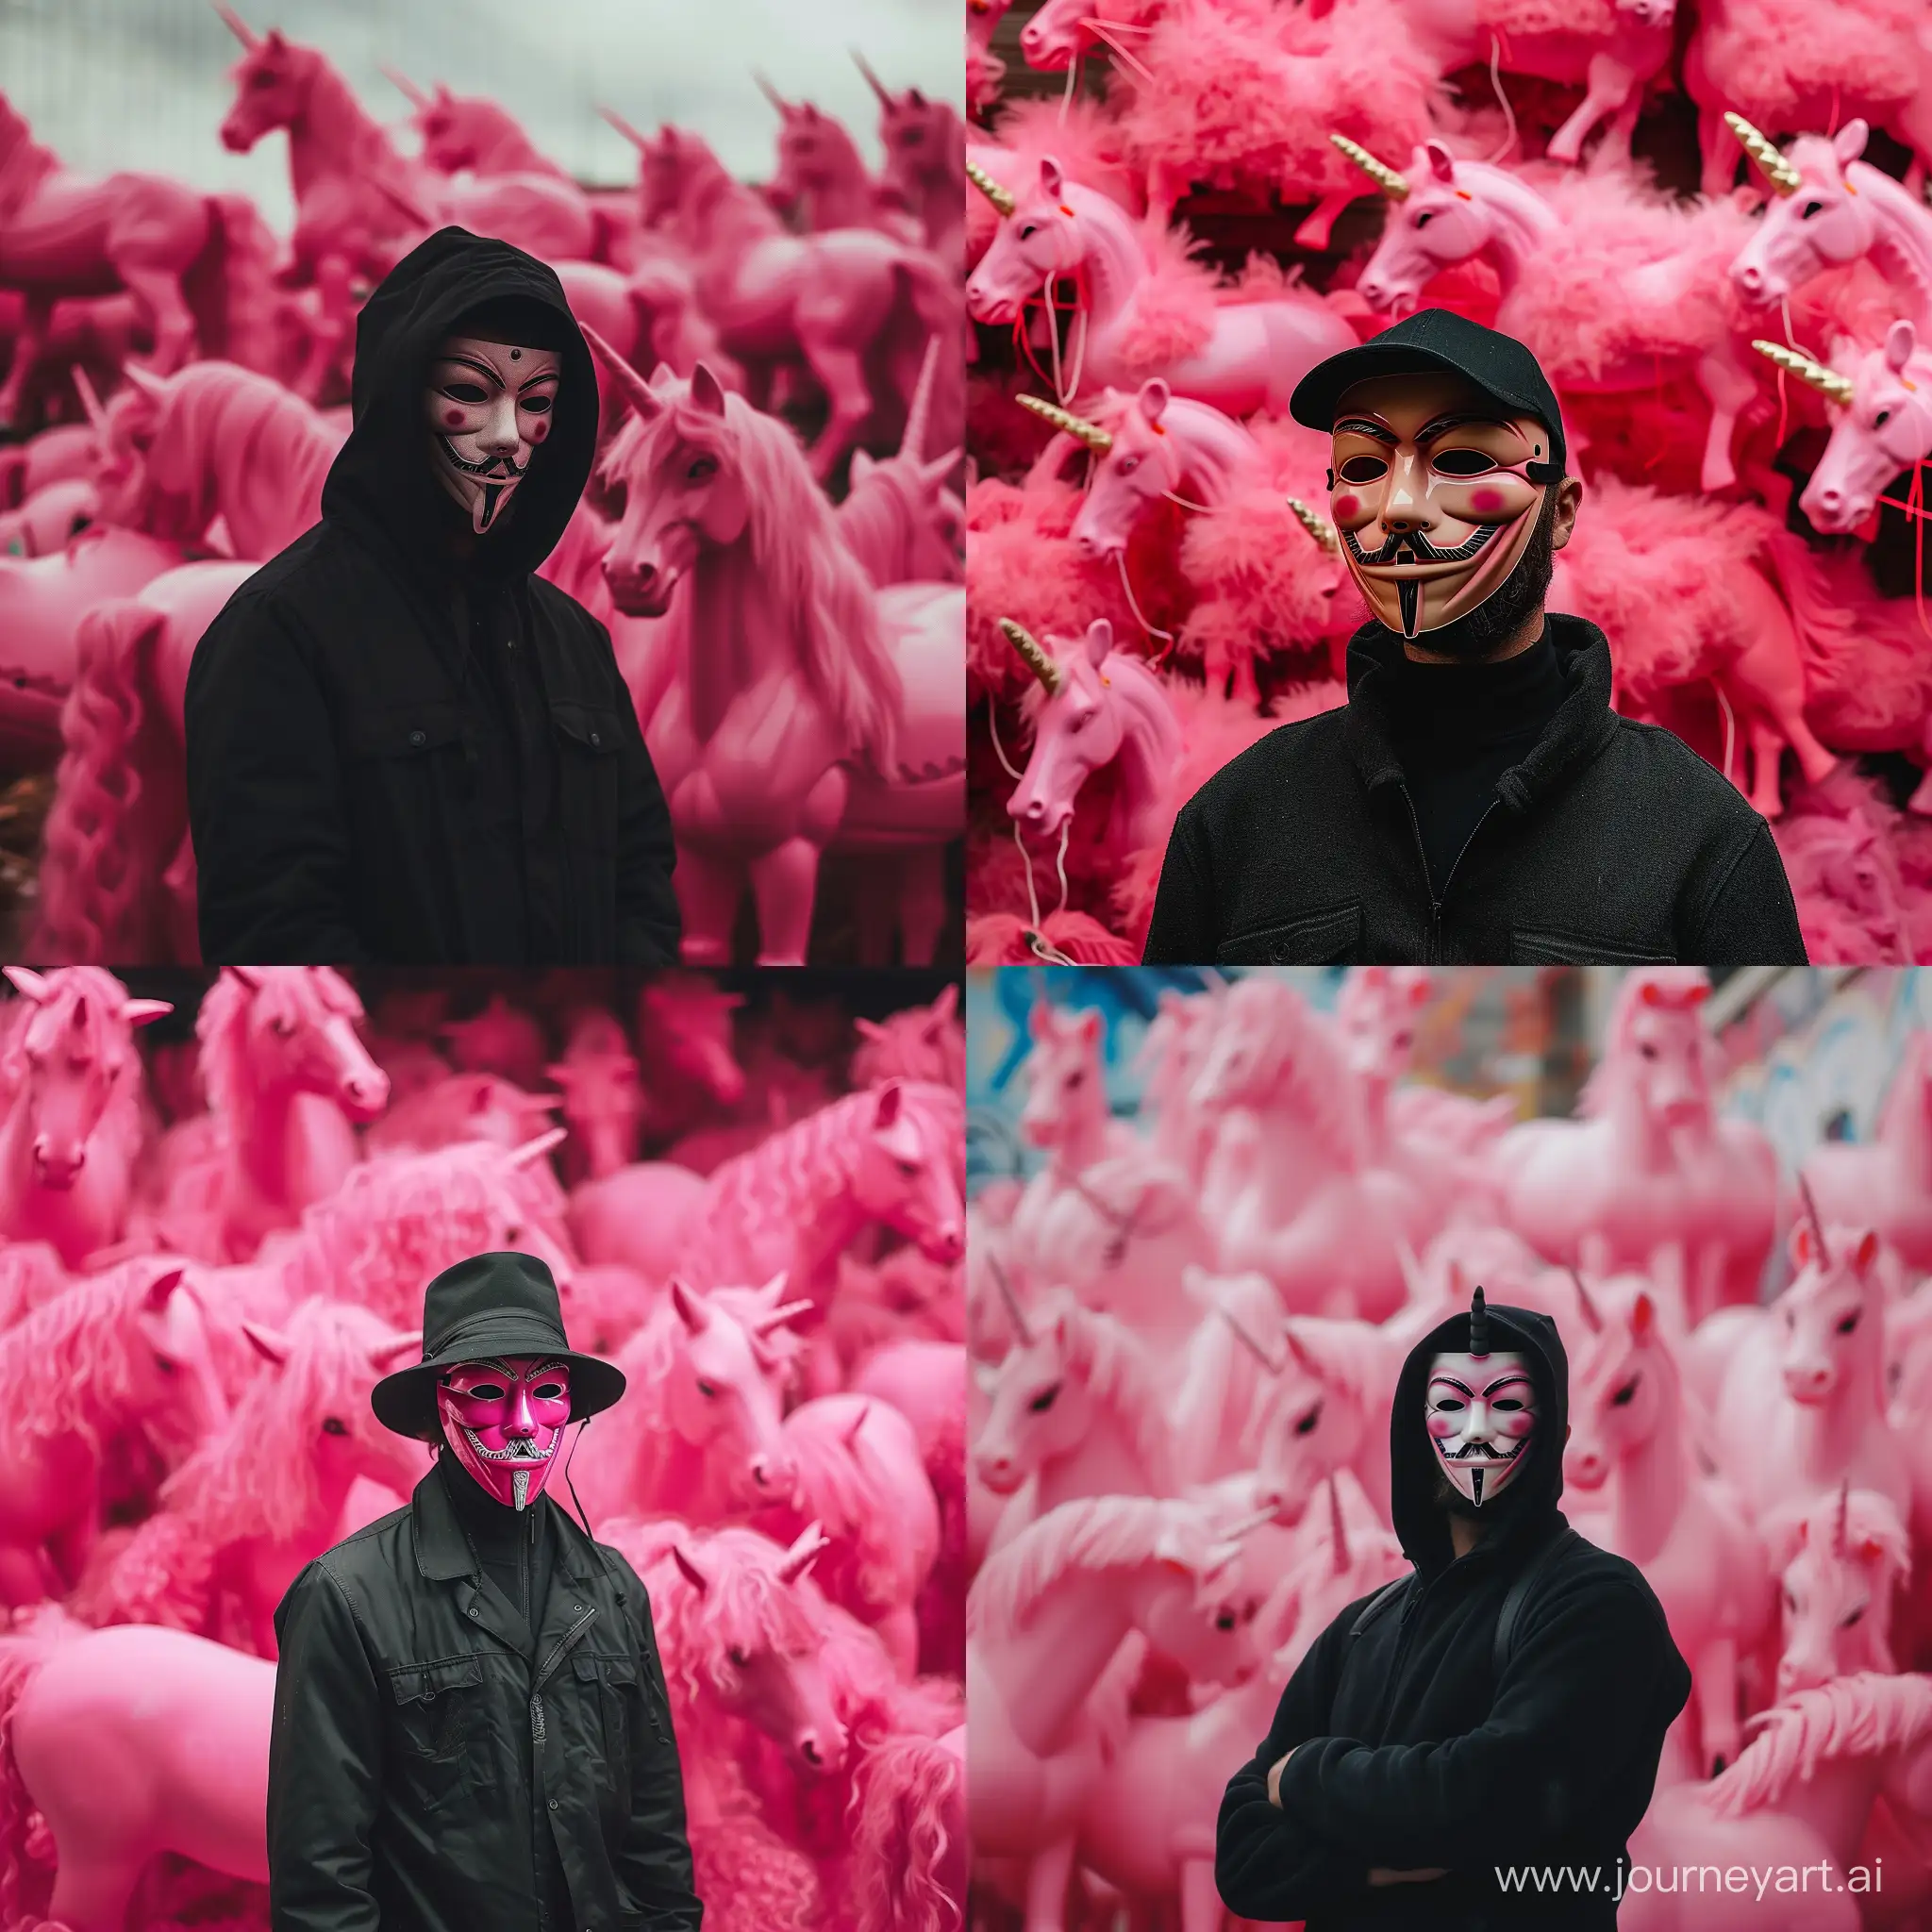 A man in Anonymous mask on a background of pink ponies